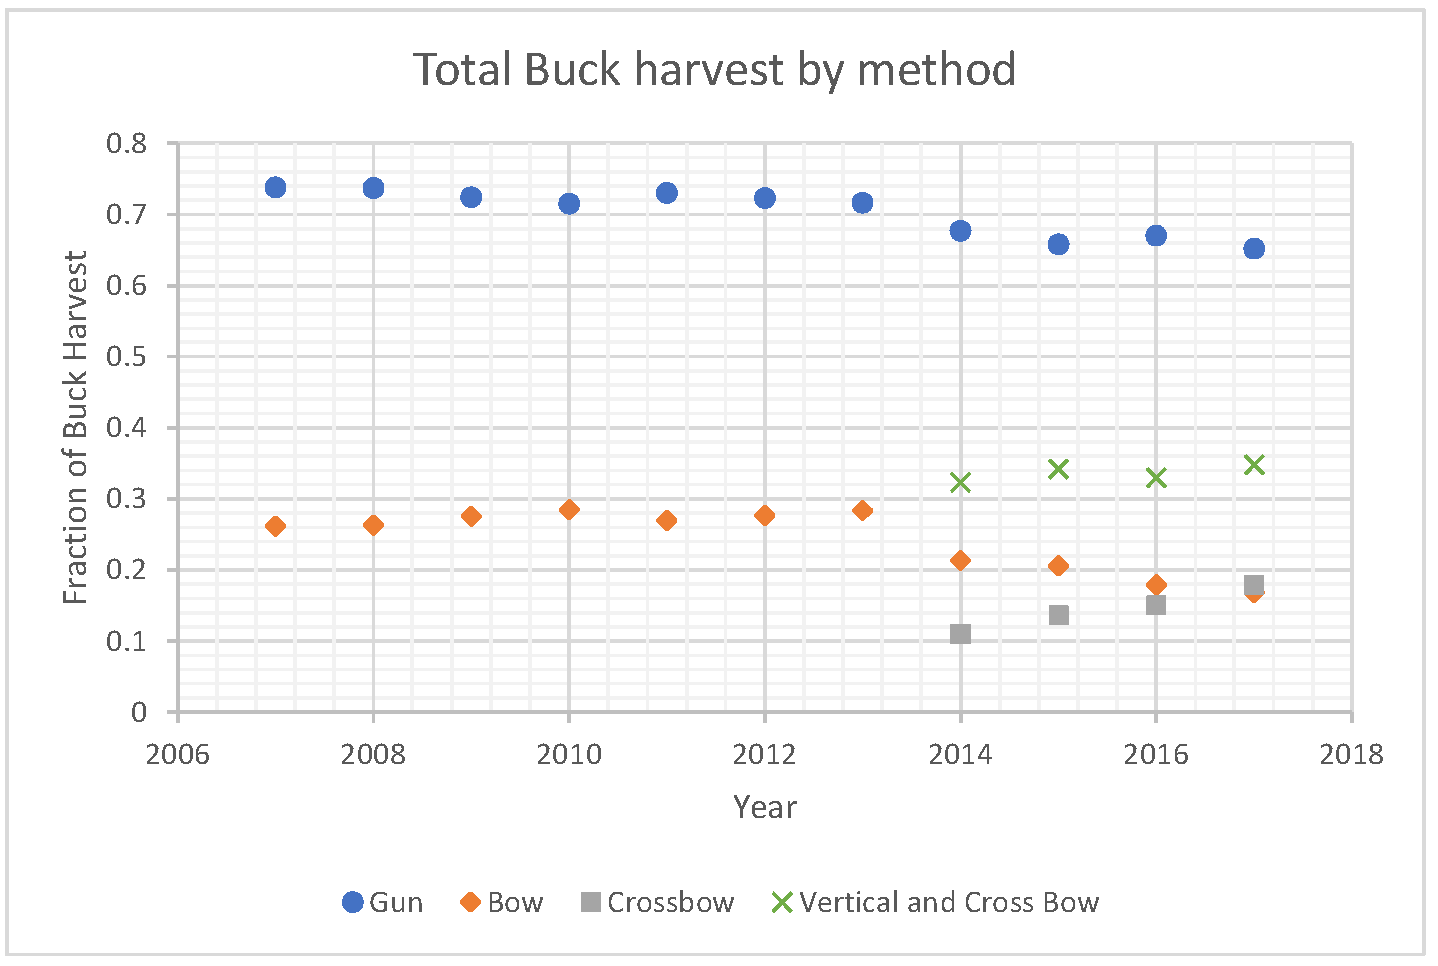 Bucks harvested in Wisconsin from 2007 to 2017. The data is broken down by harvest method.  As with the total deer harvest, about 70% of deer are harvested by gun.  The other 30% is harvested by vertical or cross bow.